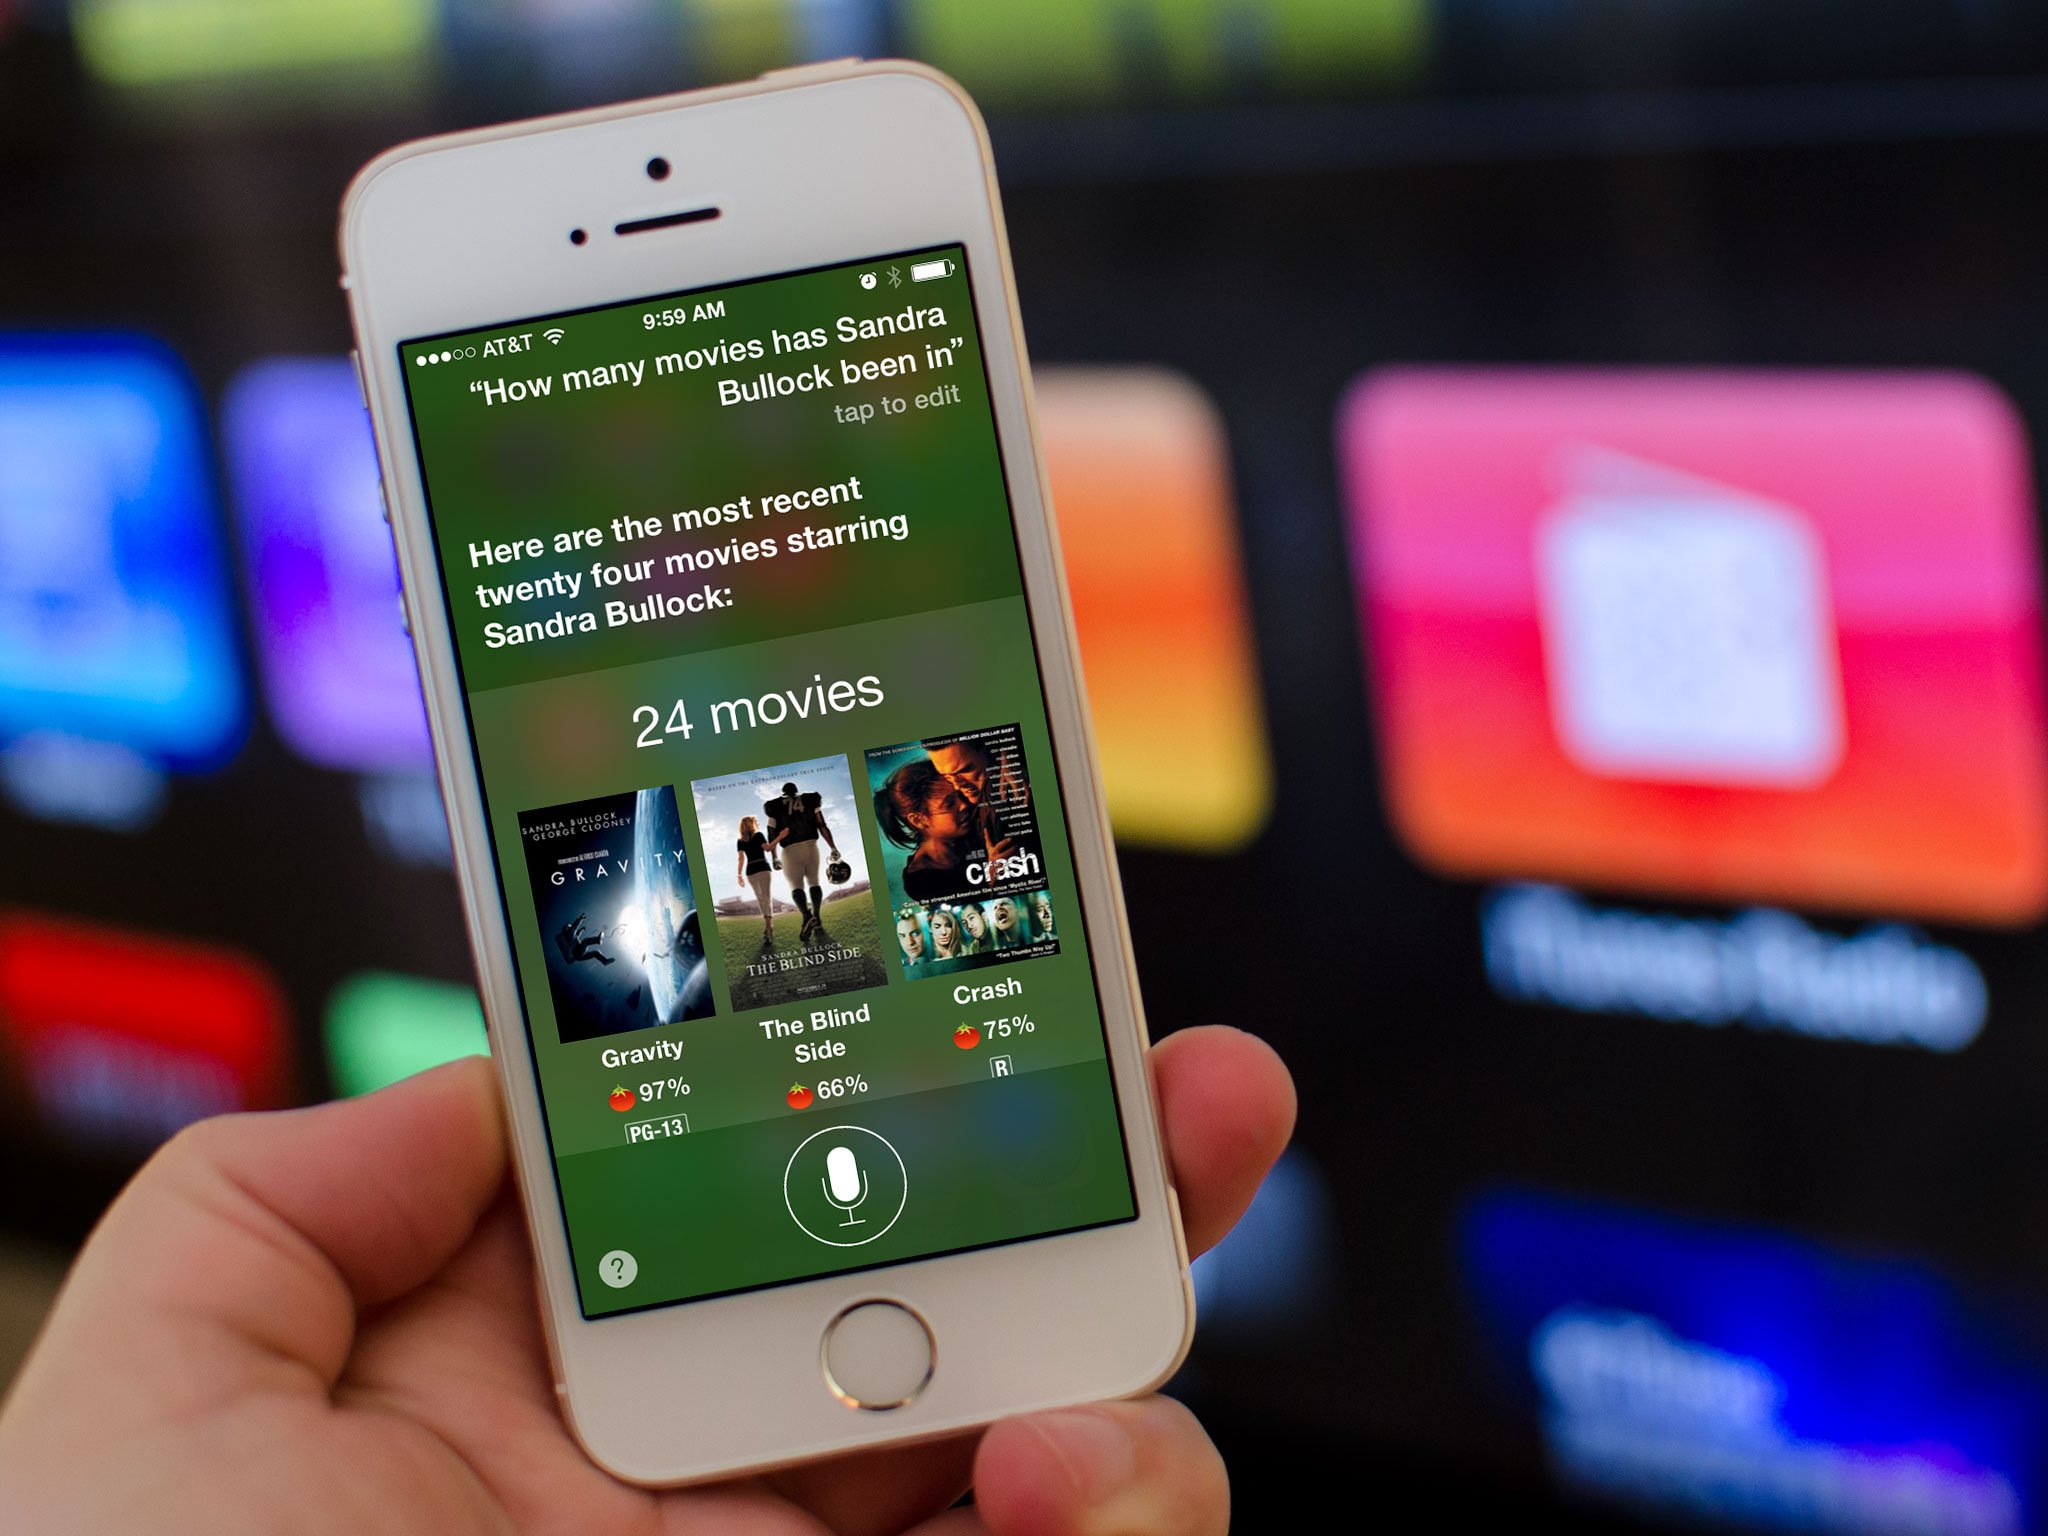 How to get information about a movie, director, or actor with Siri